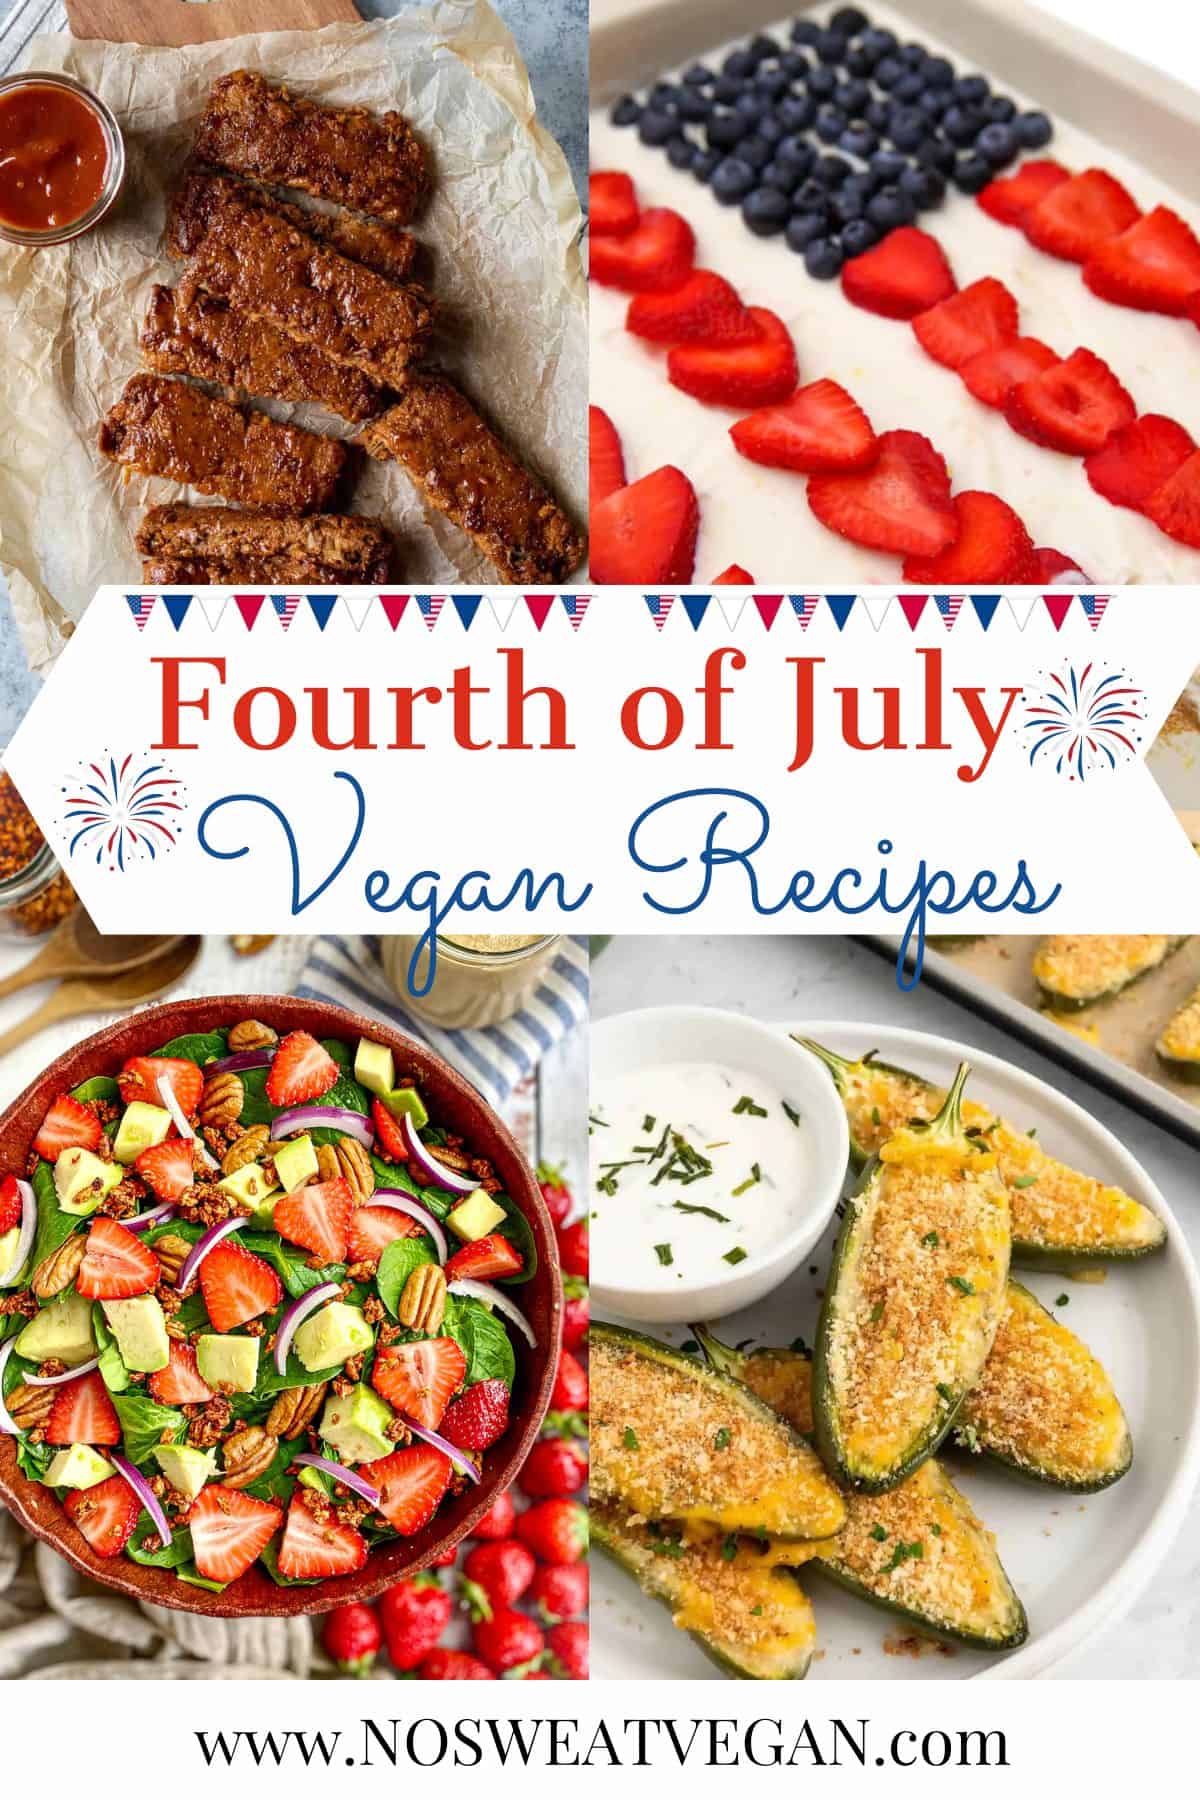 Vegan Fourth of July Recipes collage.